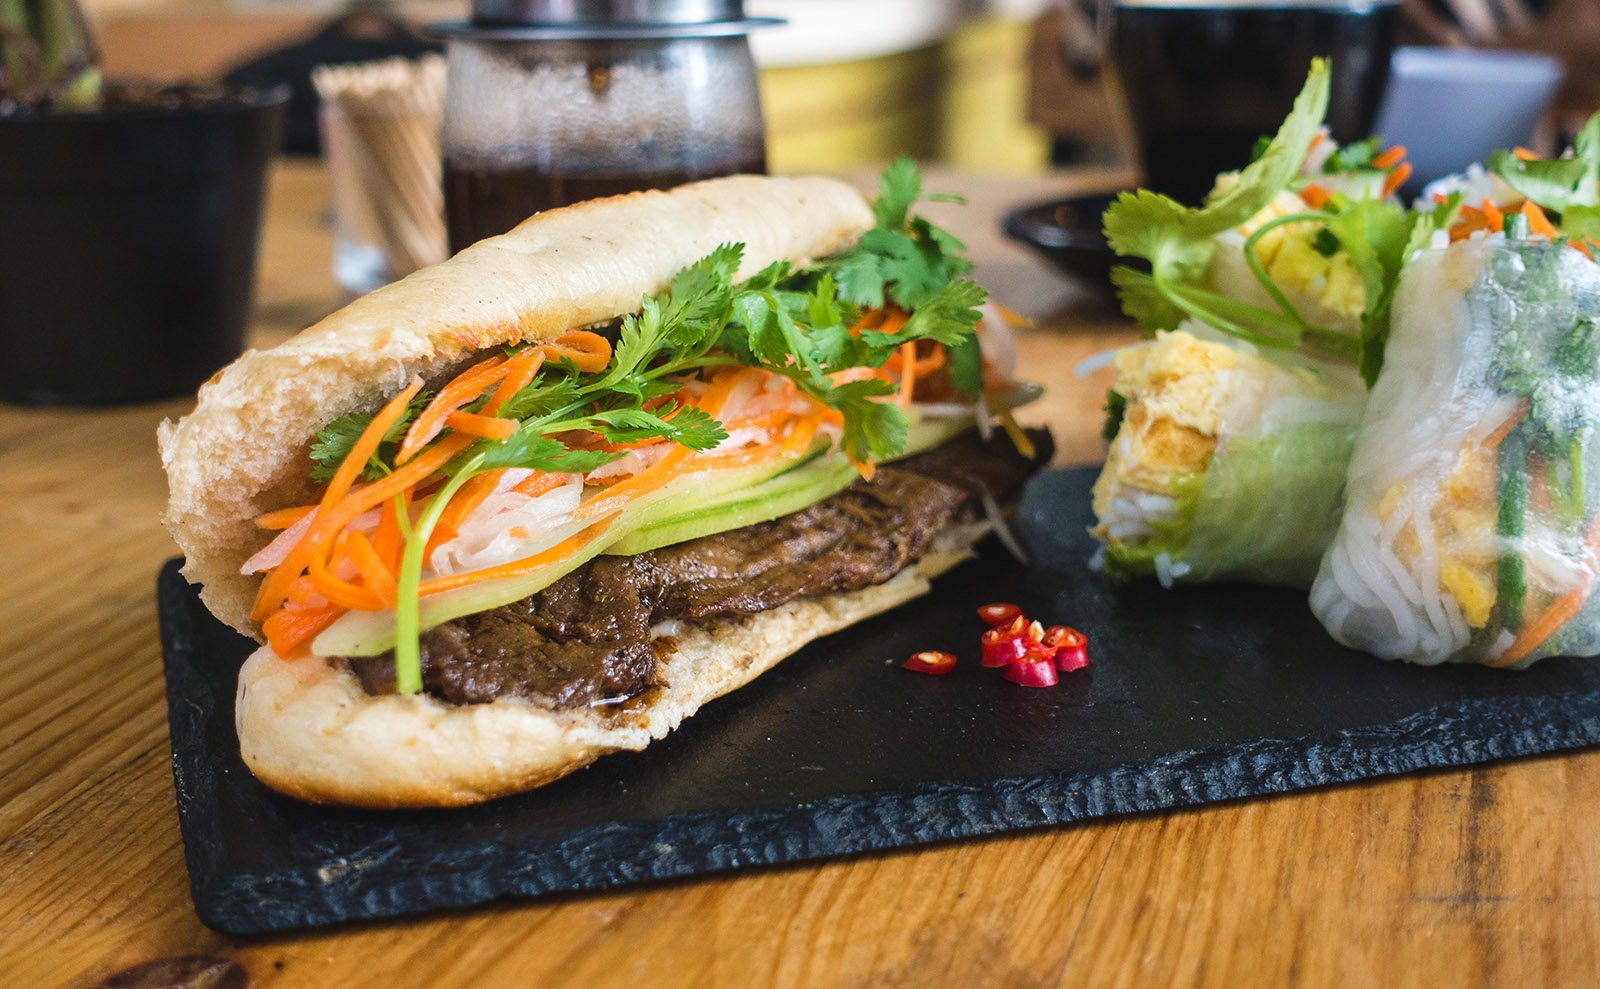 banh mi sandwich on a wooden table